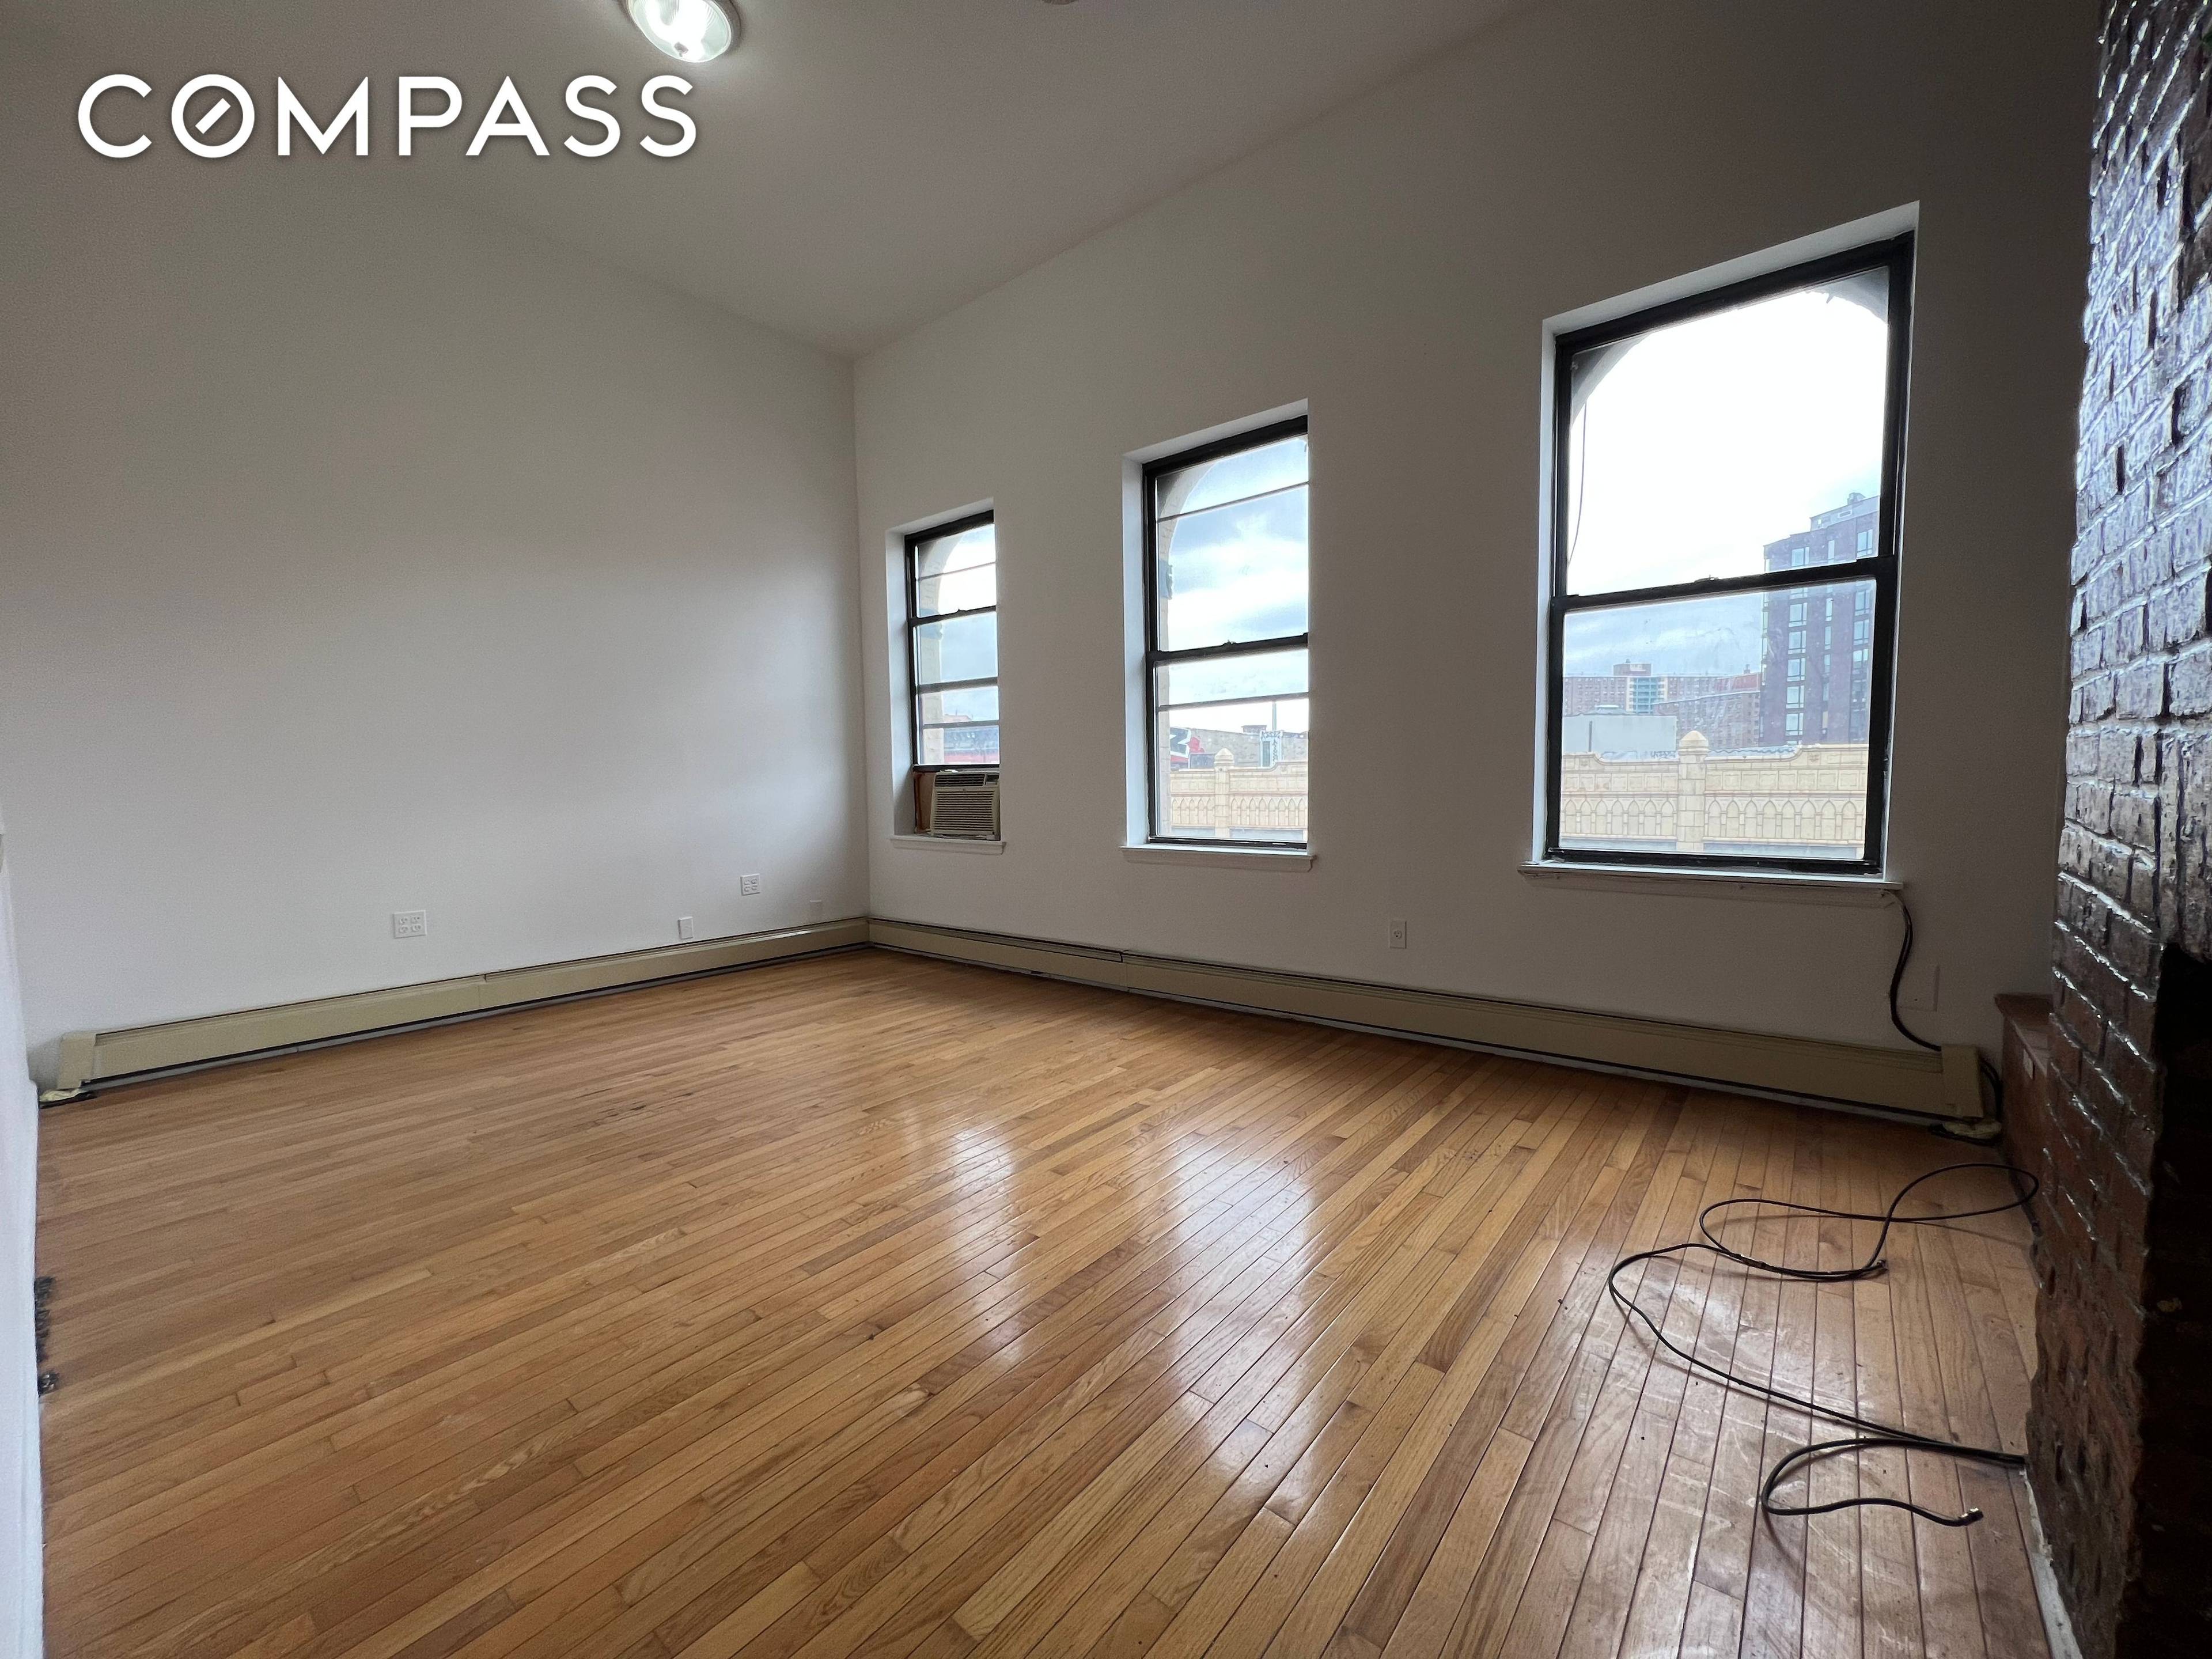 Welcome to this stunning two bedroom apartment for rent in the vibrant neighborhoods of Bushwick and Williamsburg.